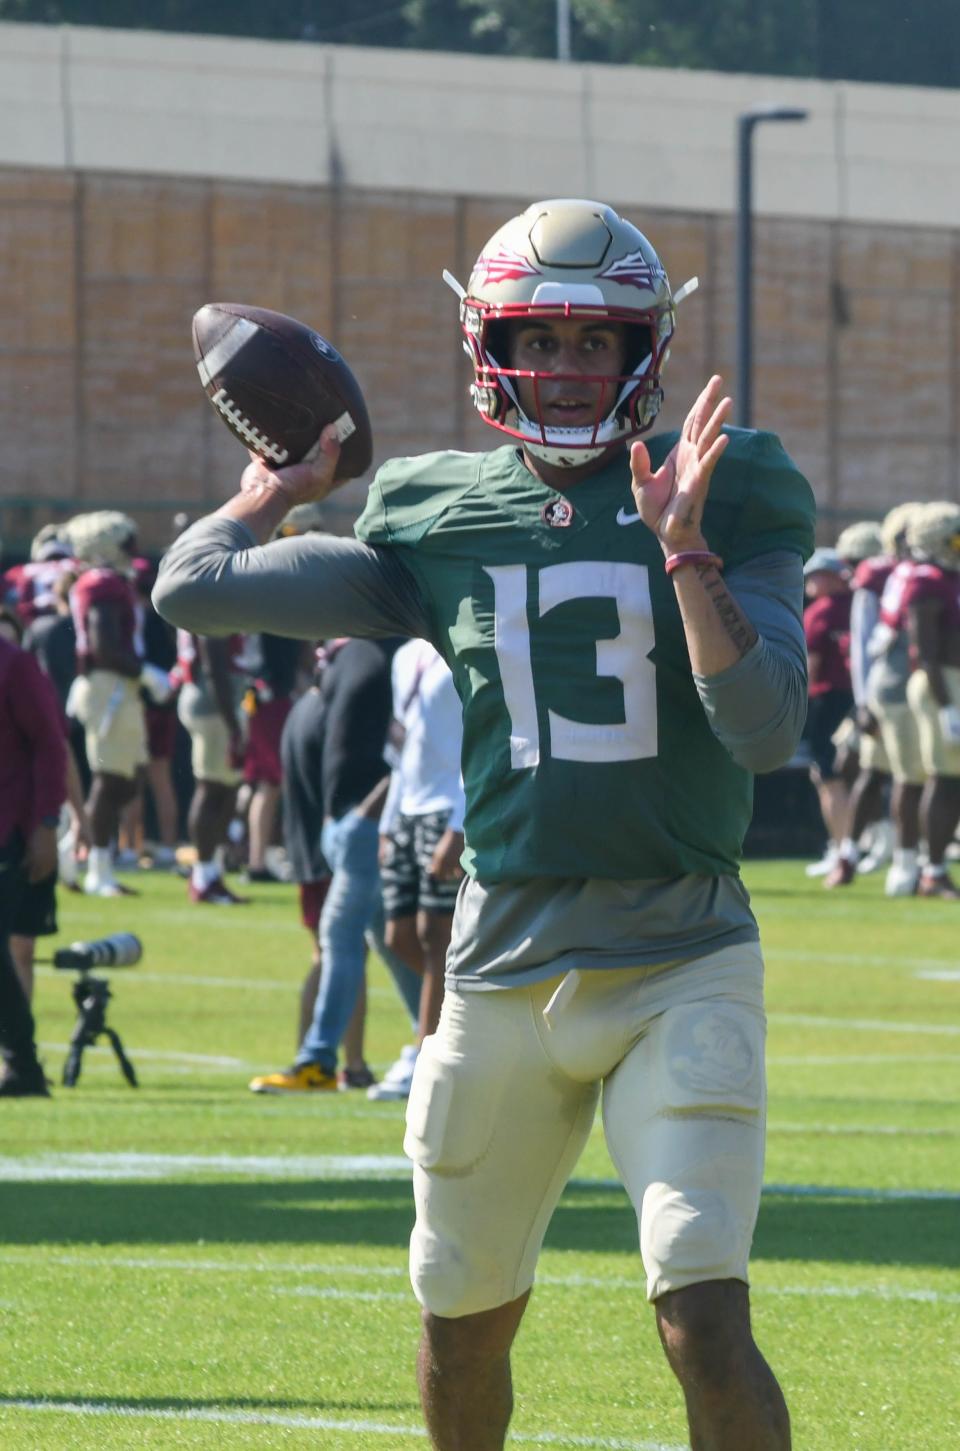 Florida State football players take part in drills during an FSU spring football practice of the 2023 season on Thursday, March 30.